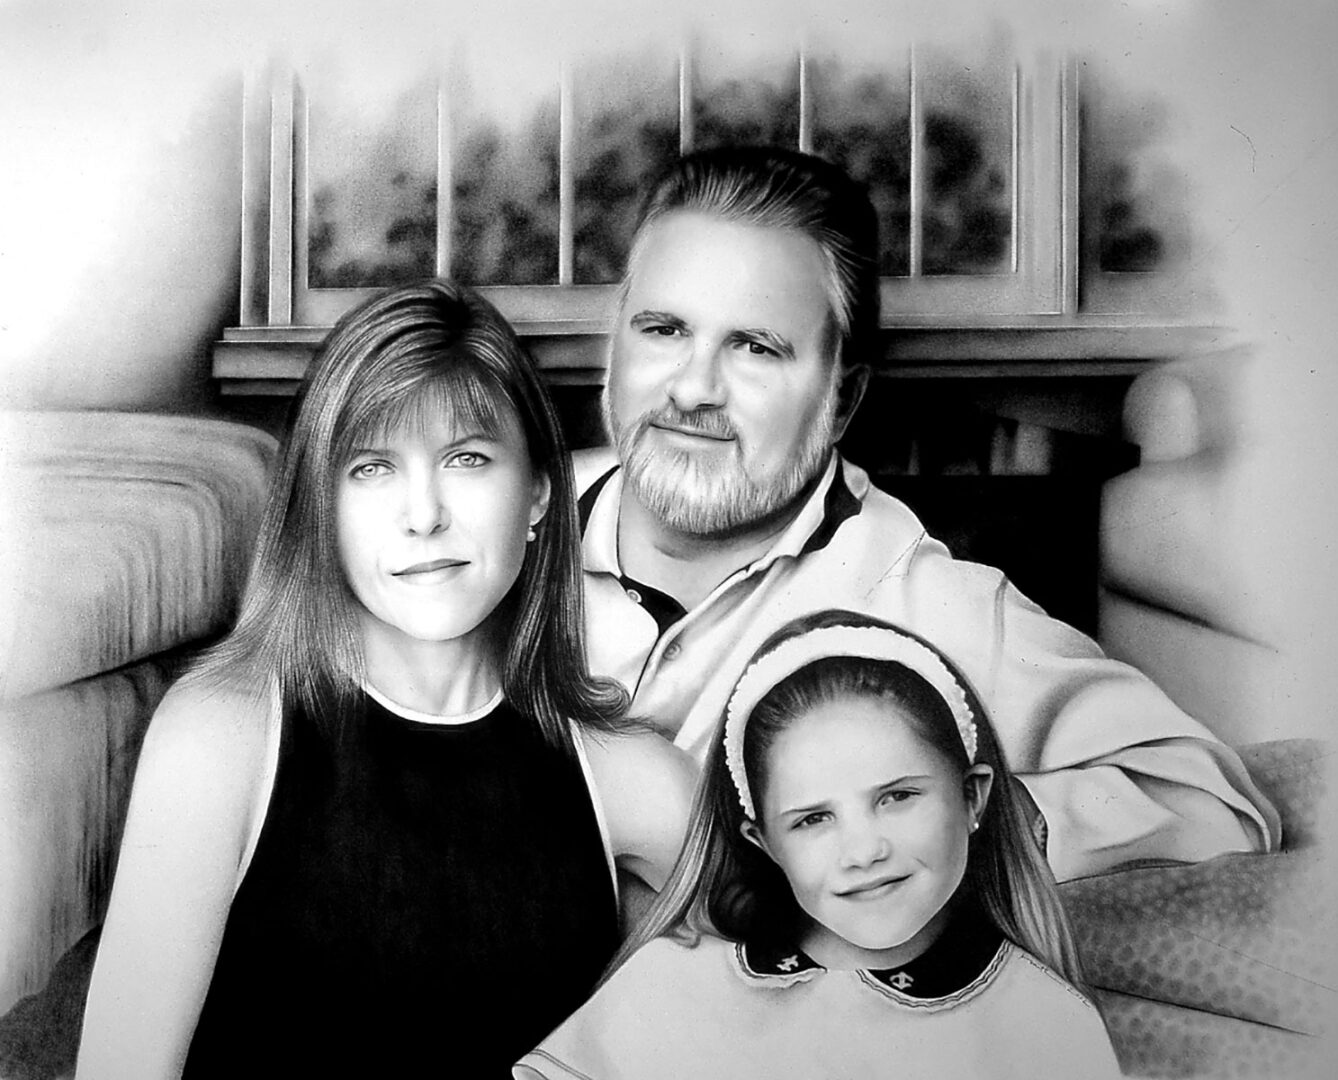 black and white family portrait, made using art pencils